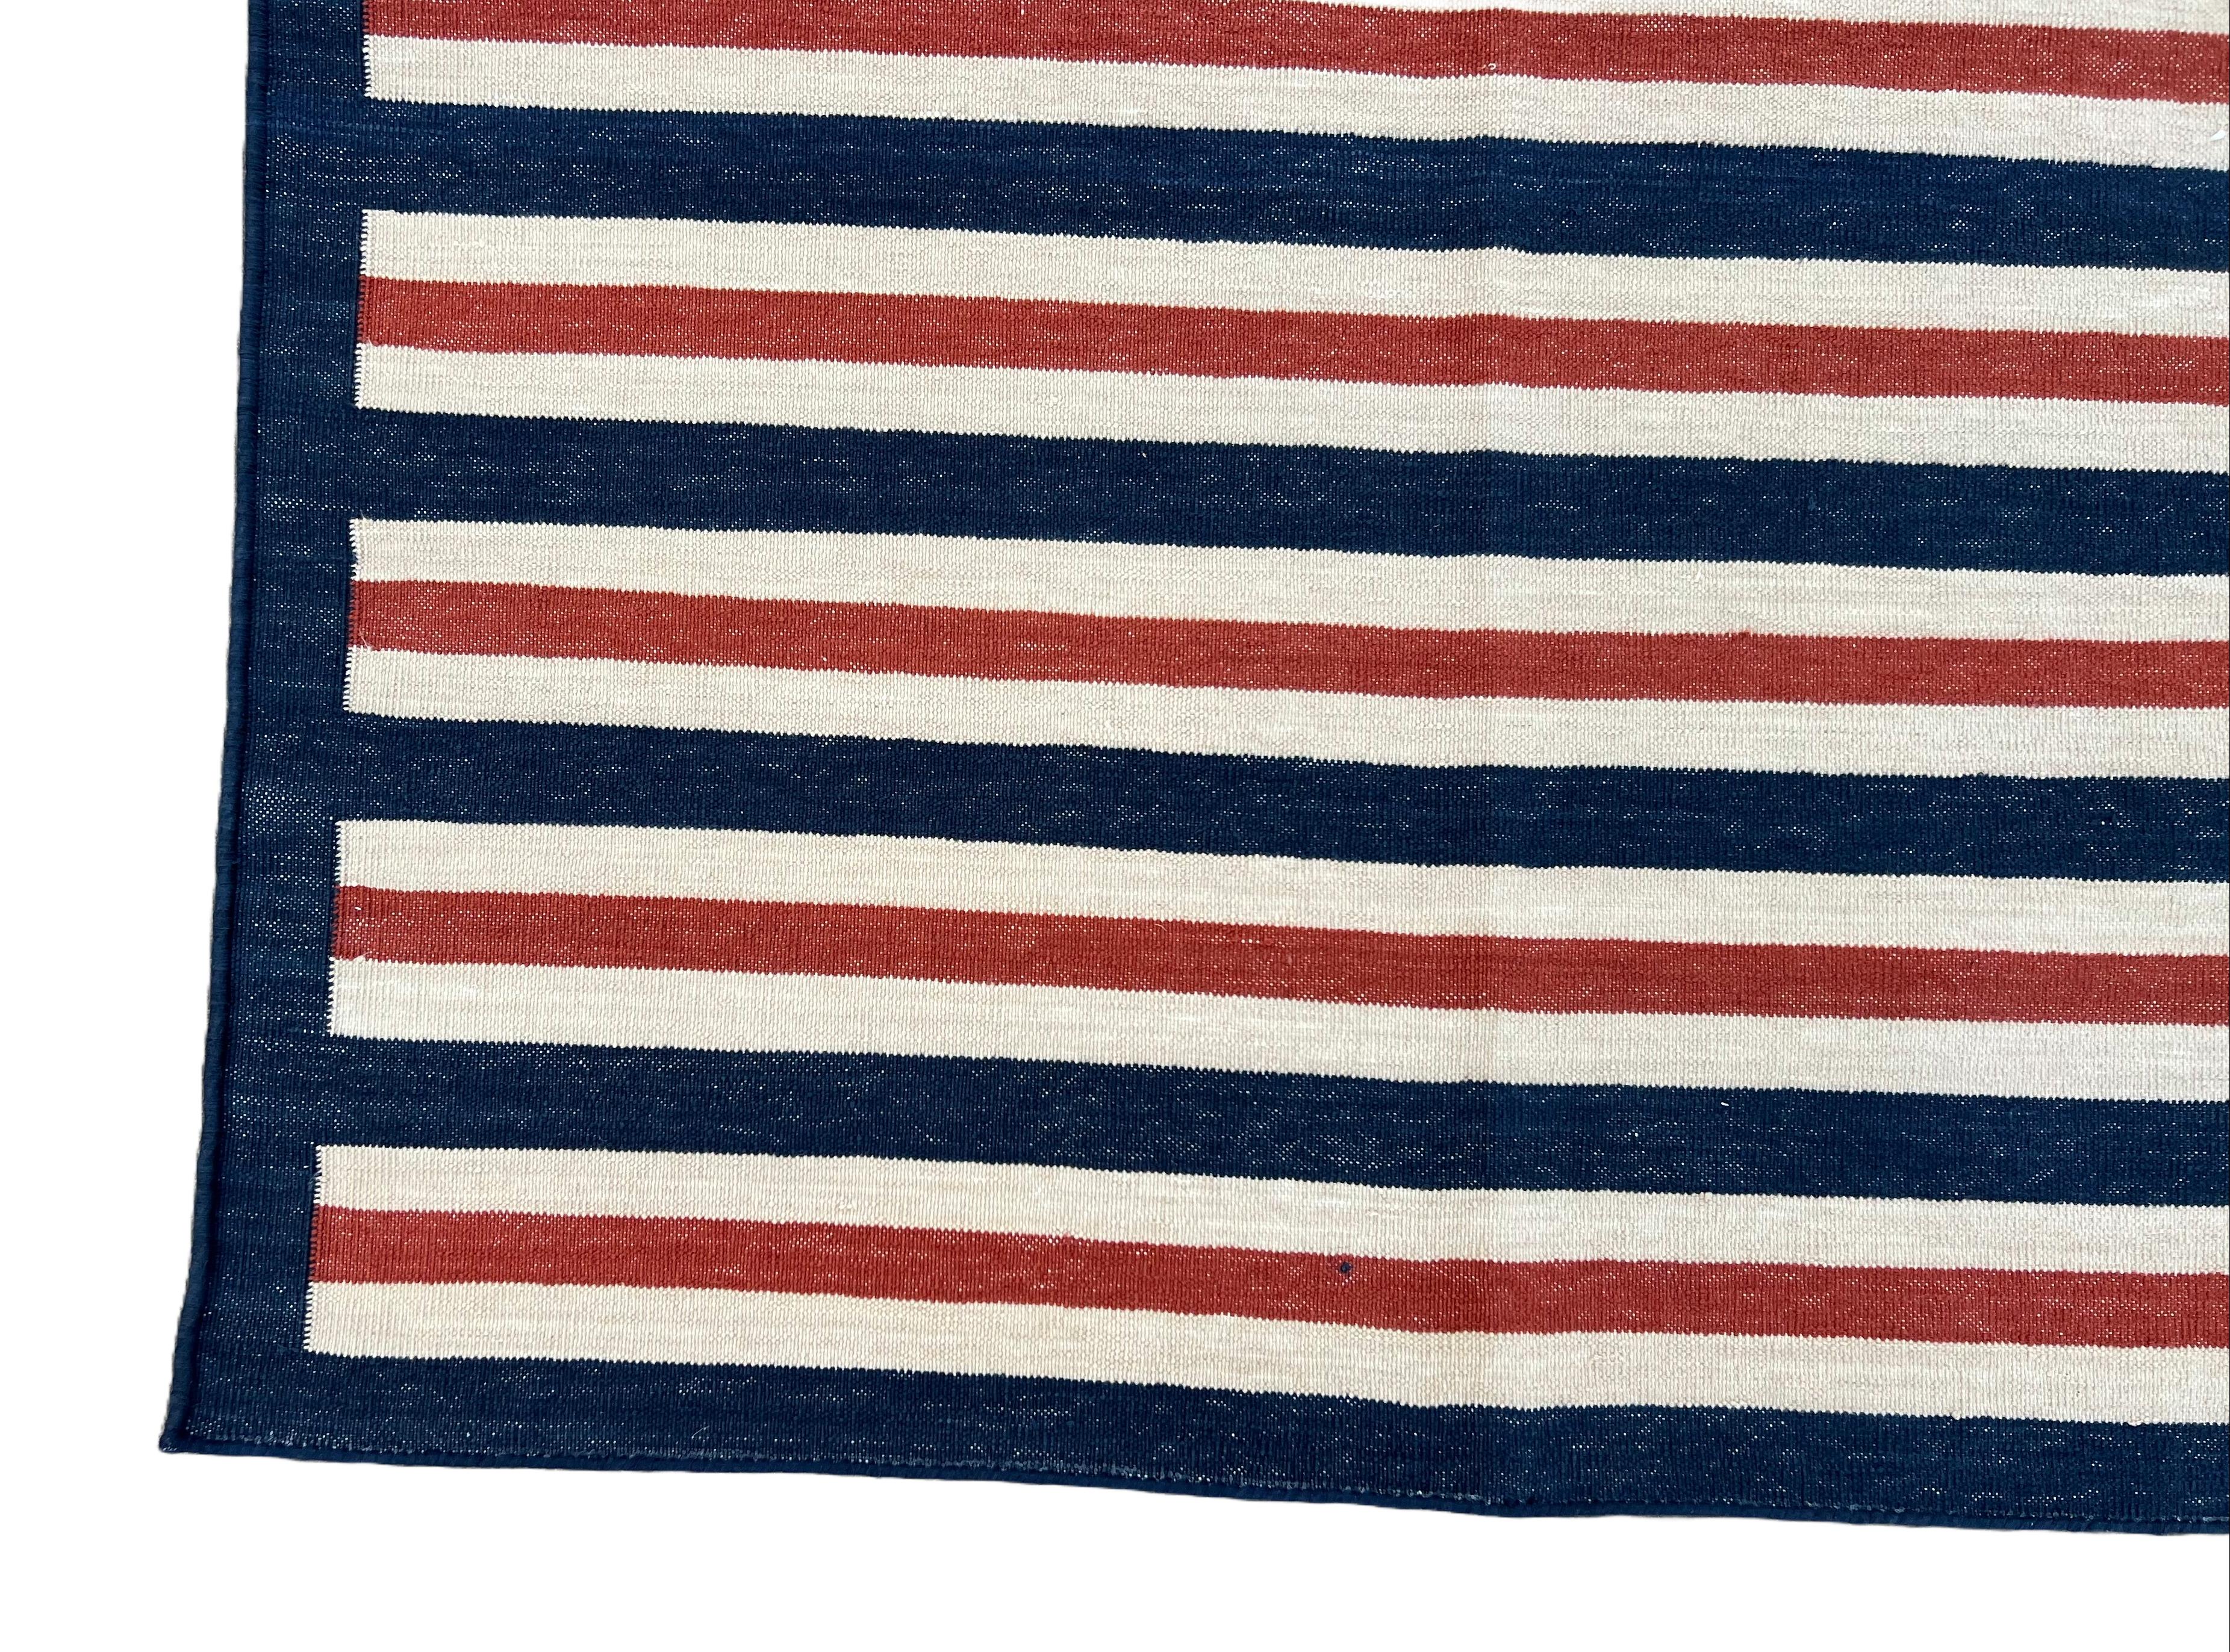 Contemporary Handmade Cotton Area Flat Weave Rug, 3x5 Blue And Red Striped Indian Dhurrie Rug For Sale